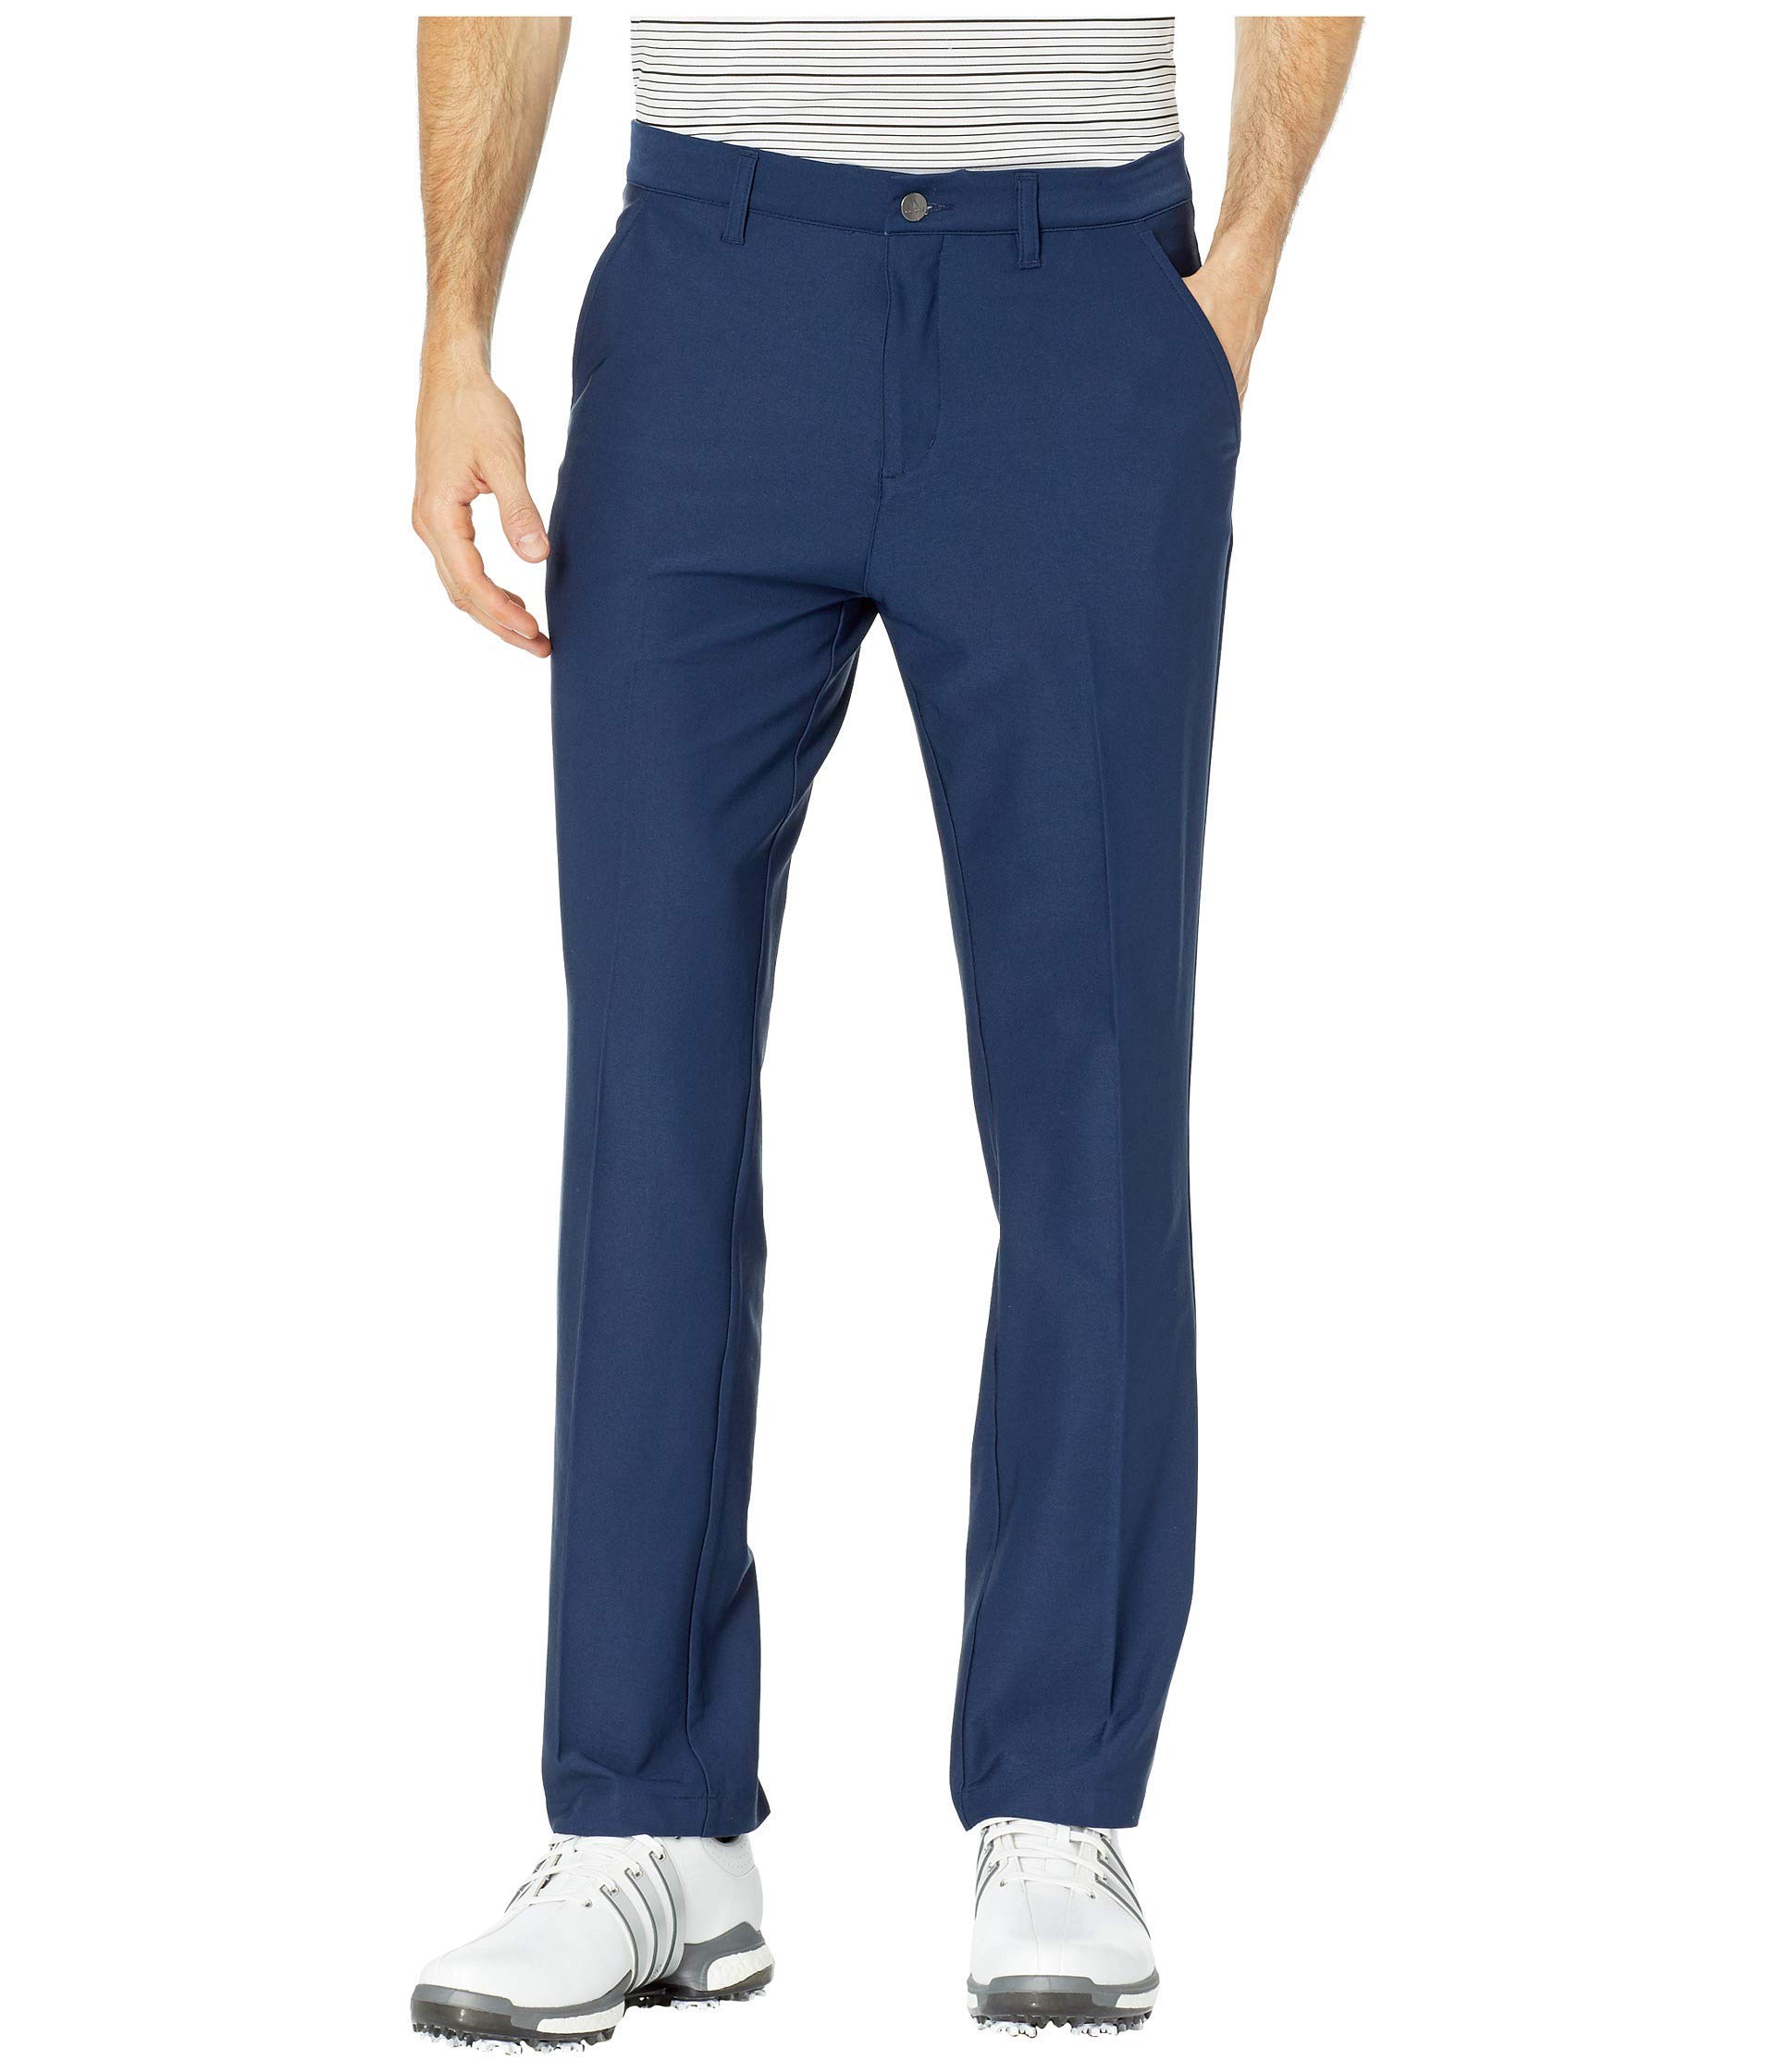 adidas Go-To 5 Pocket Pants Mens Golf Trousers | Scratch72